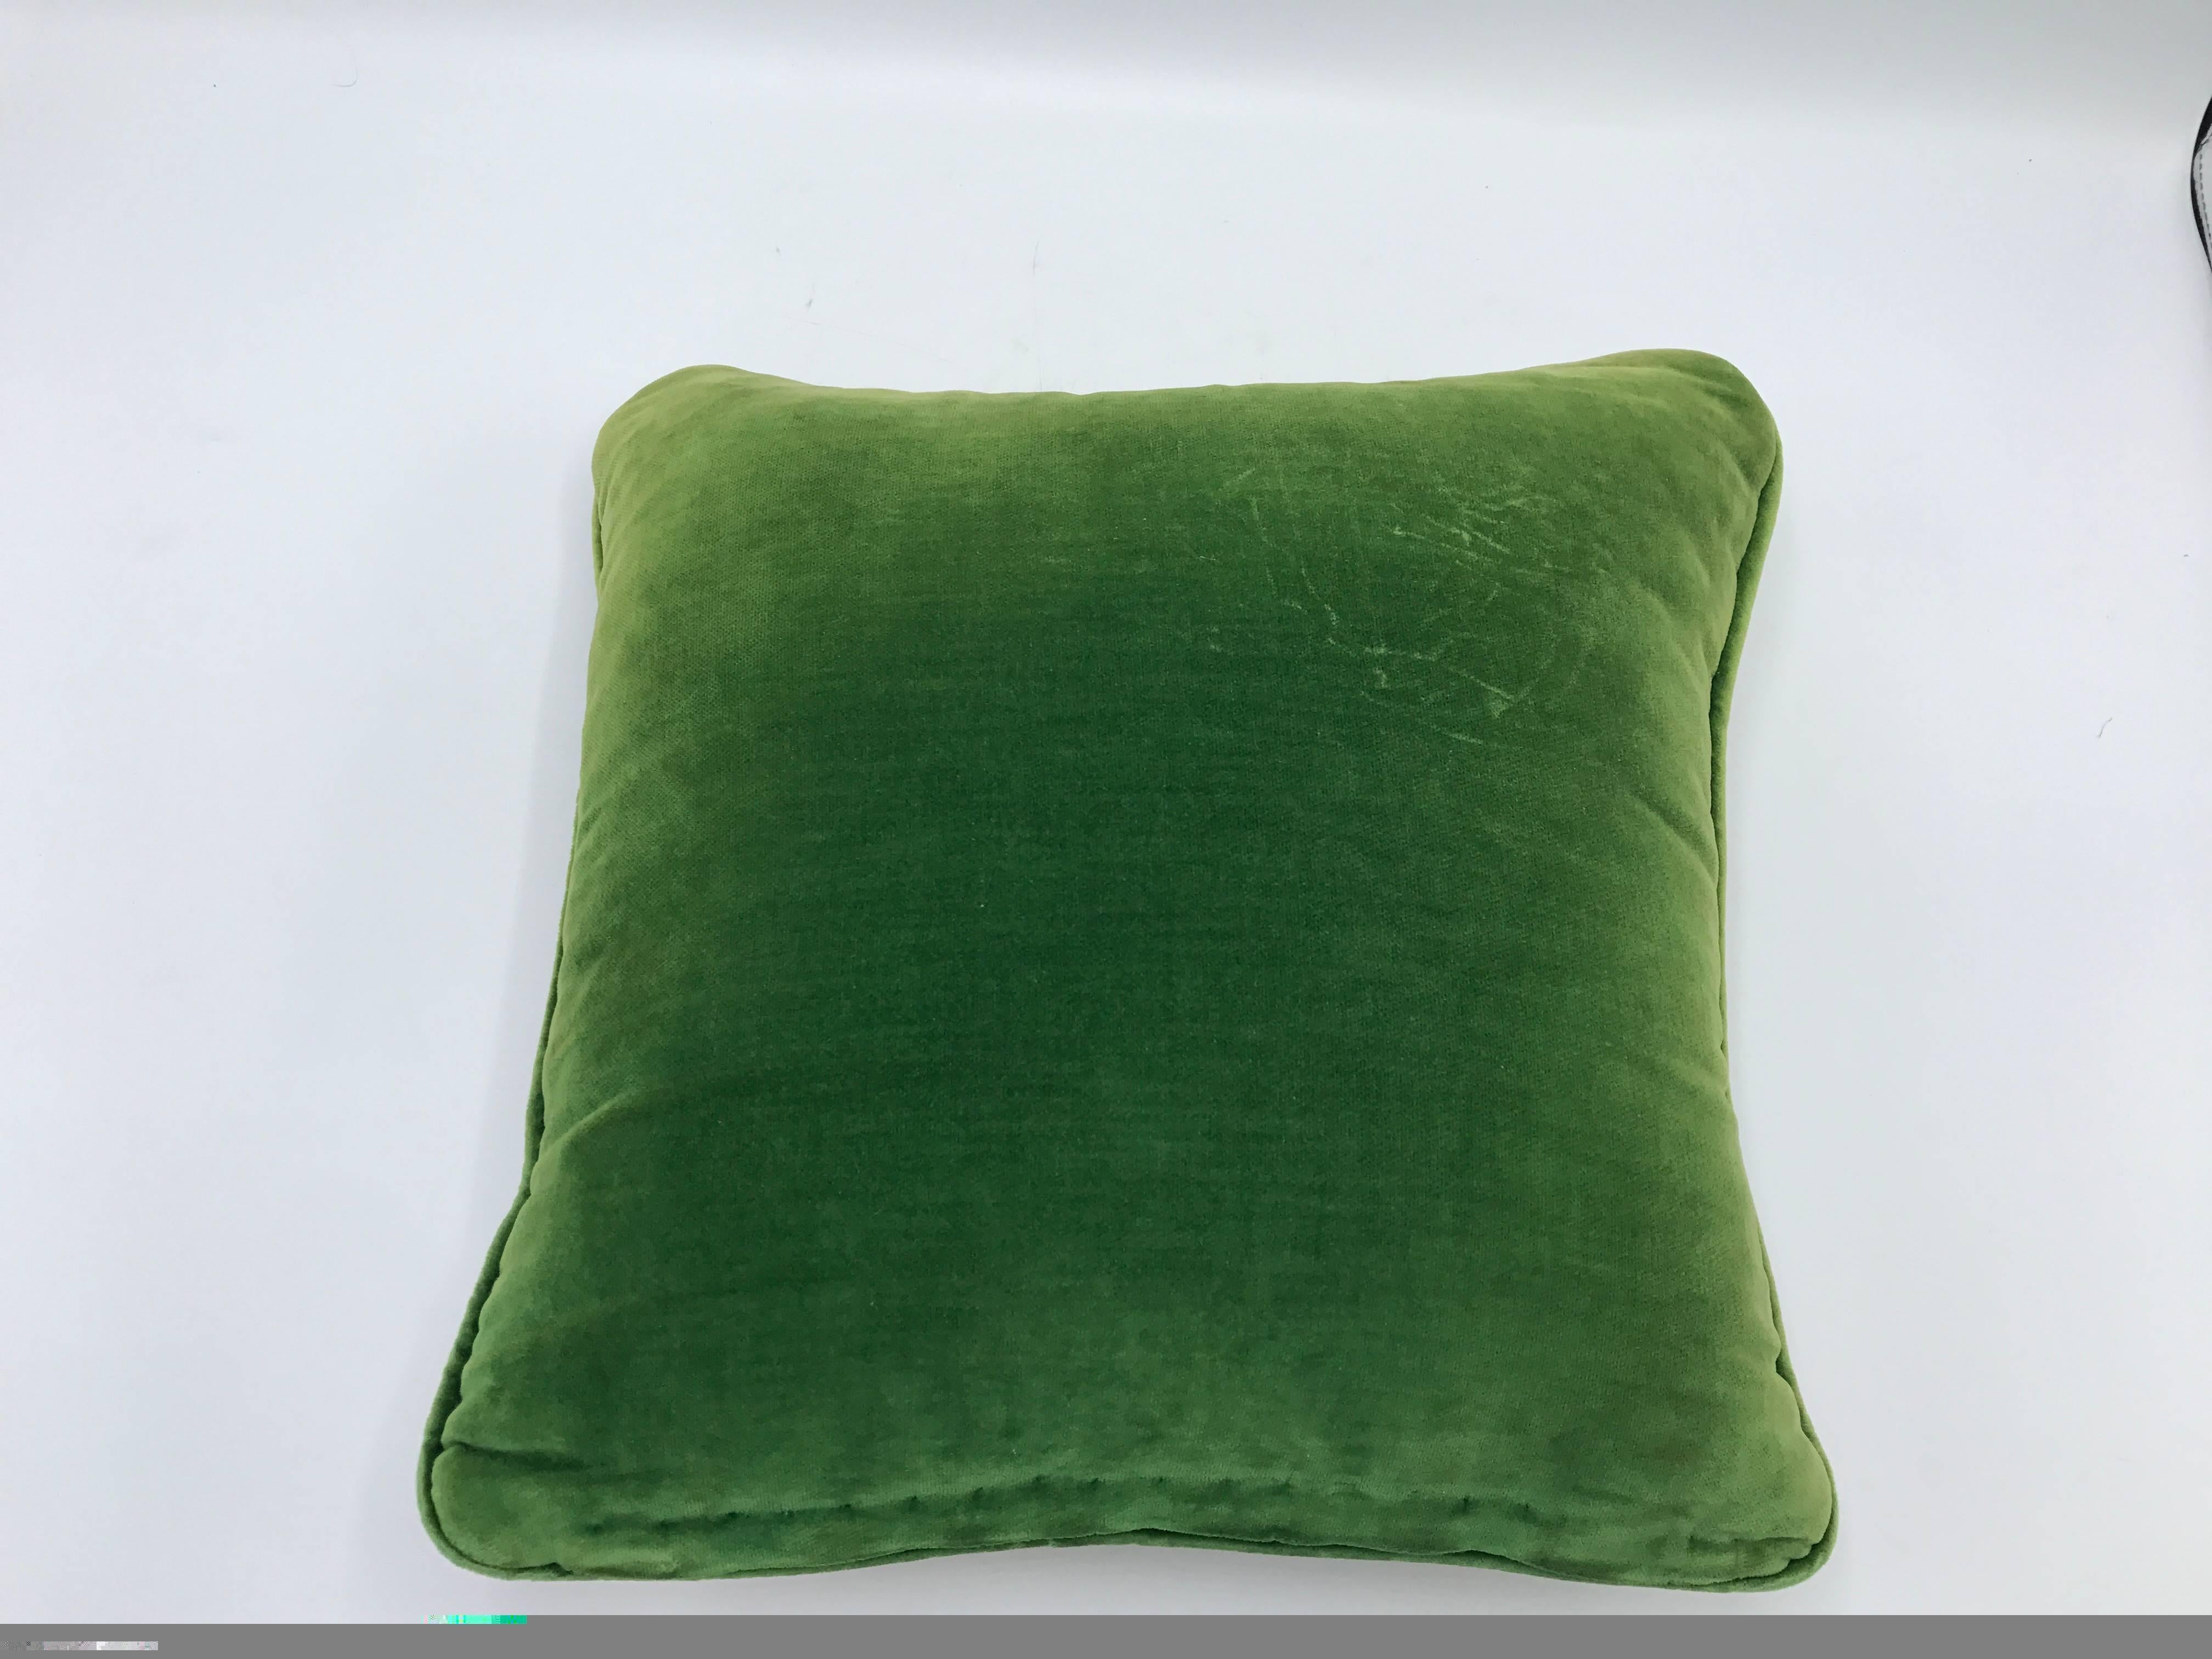 Wool 1950s Green Needlepoint Pillow with Floral Motif